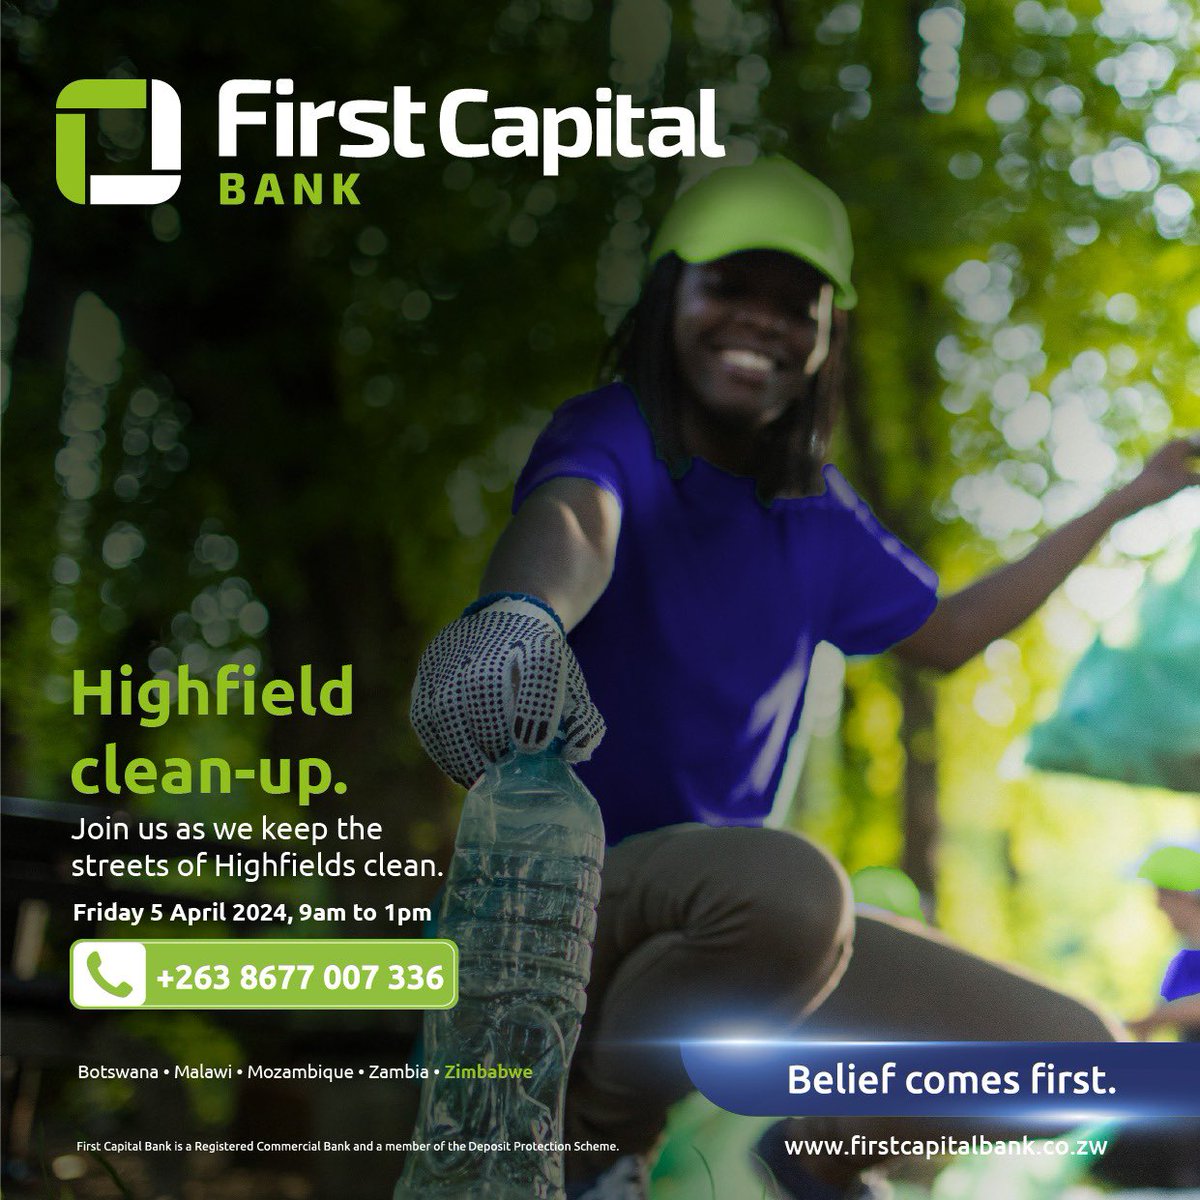 We believe in keeping our communities clean. Join us as we clean up Highfields today. #beliefcomesfirst